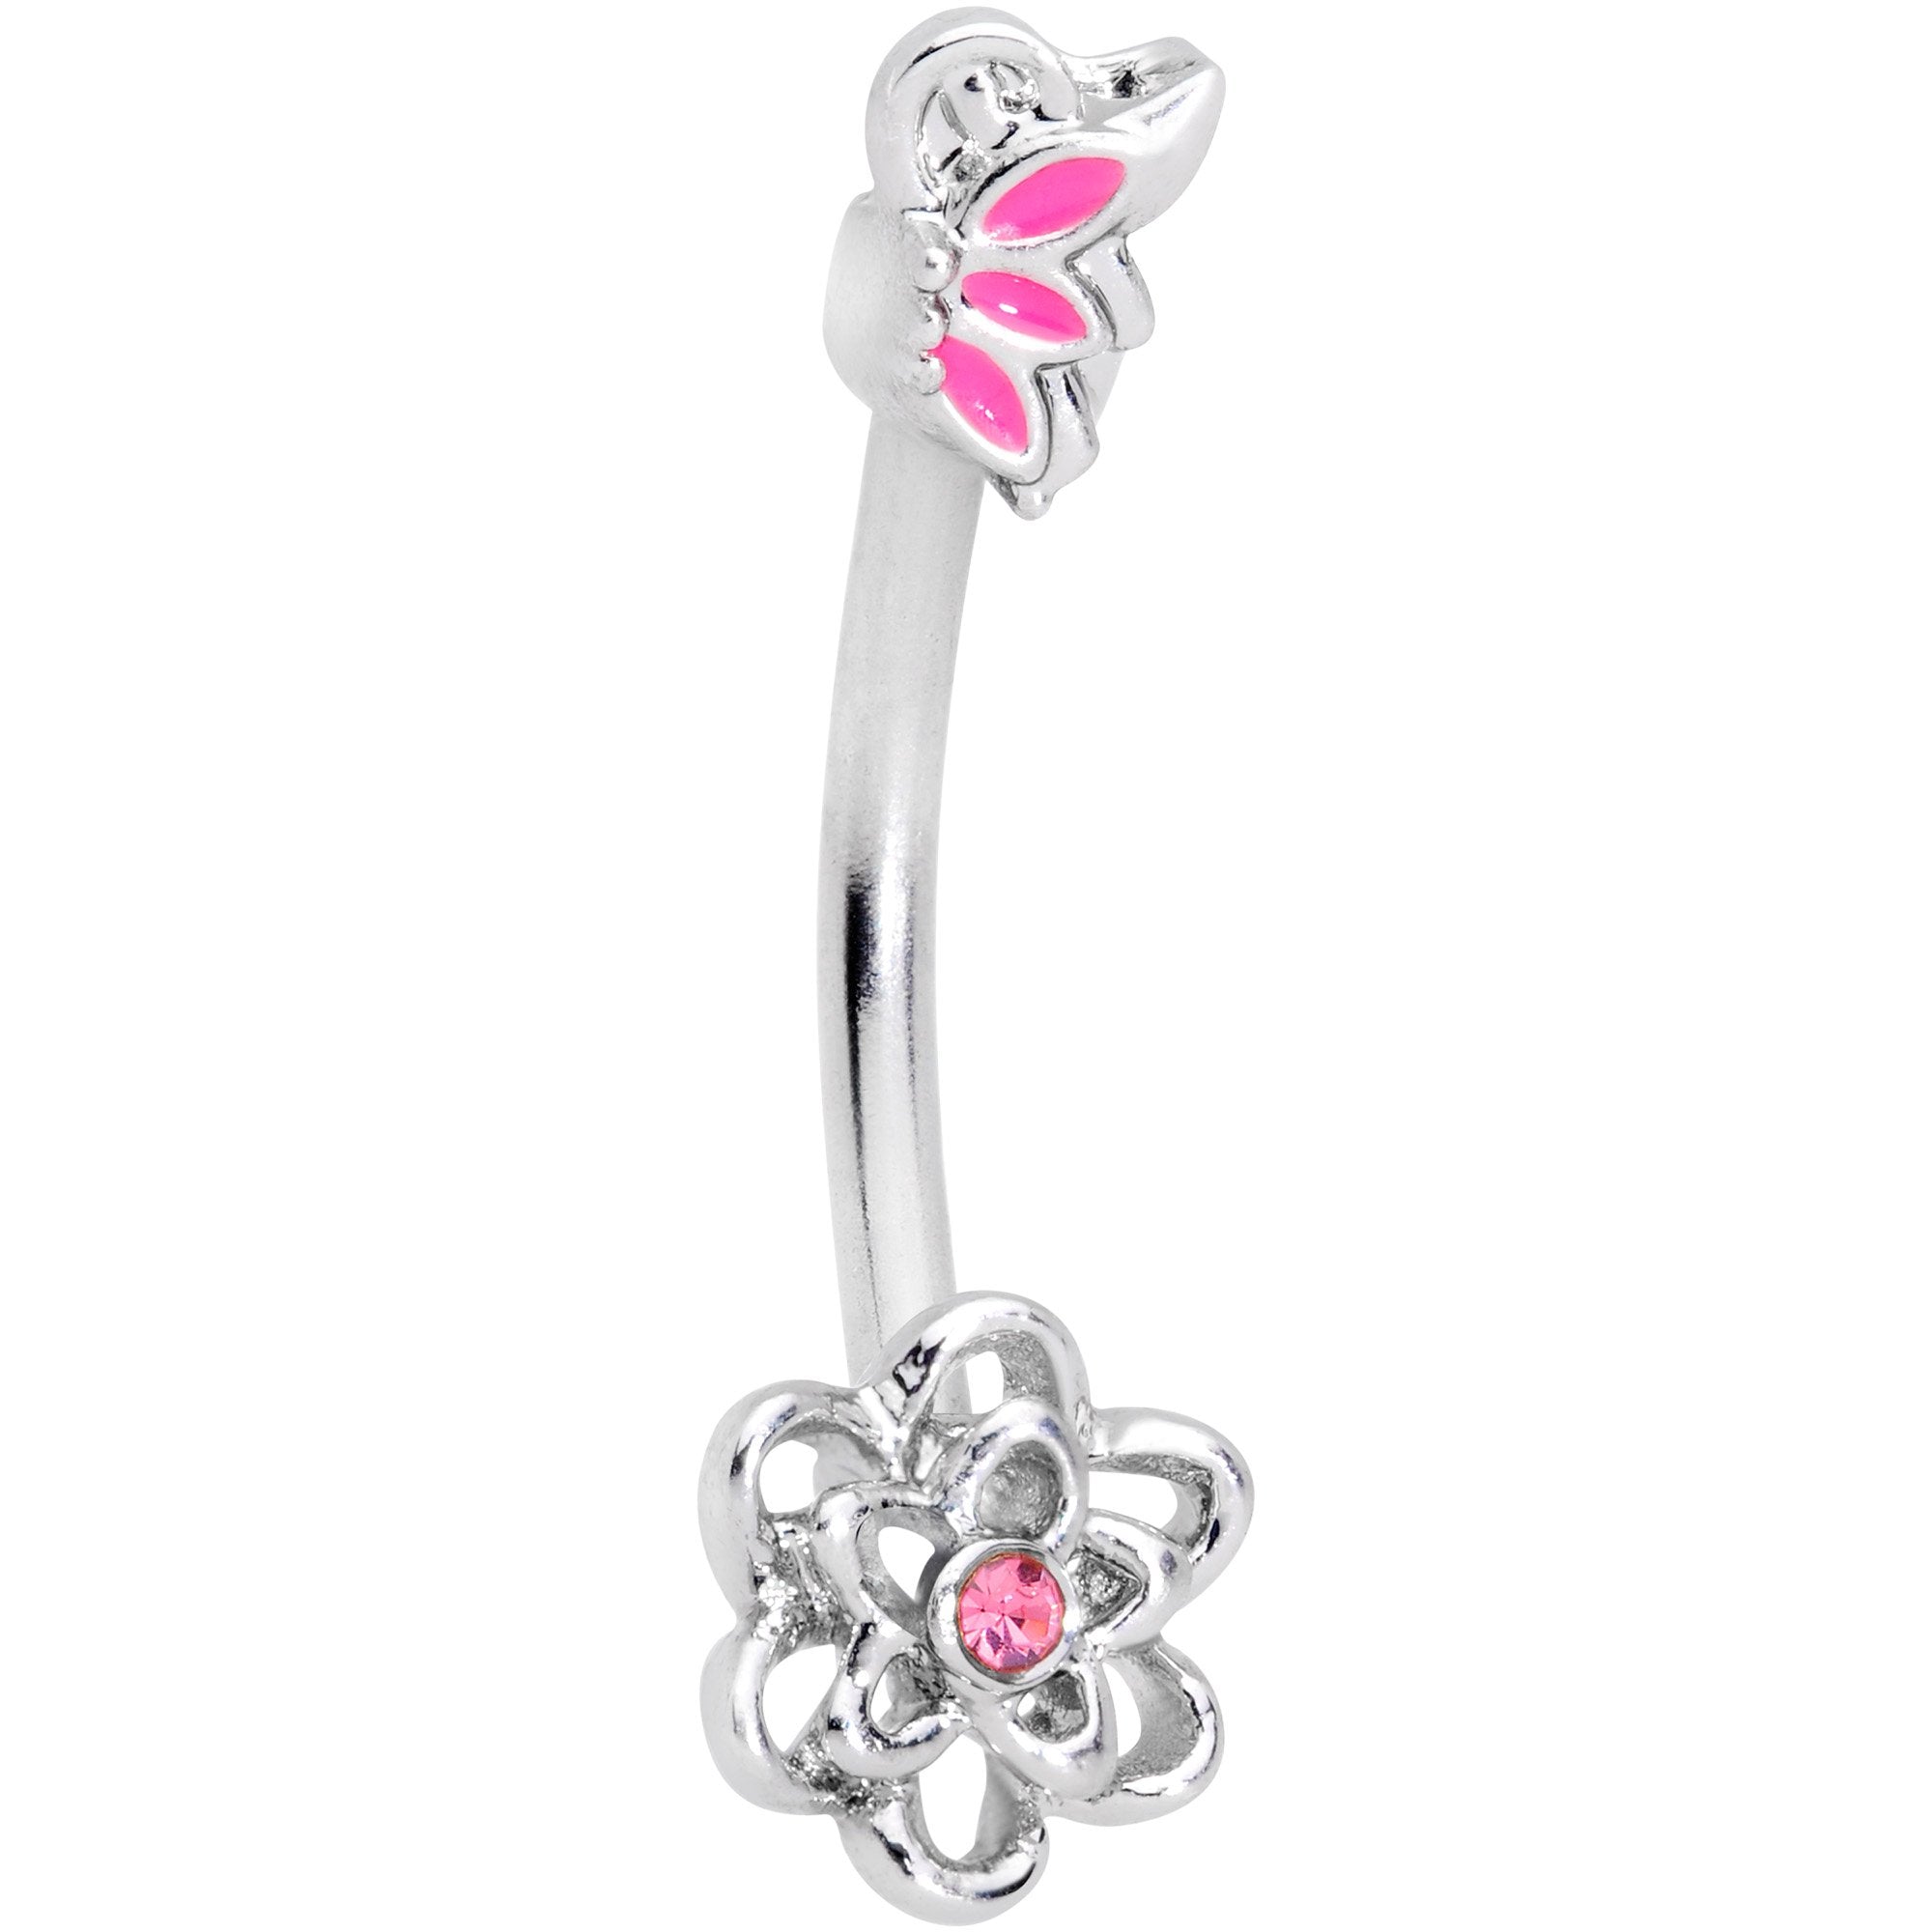 16 Gauge 3/8 Pink Gem Butterfly Loopy Flower Curved Eyebrow Ring